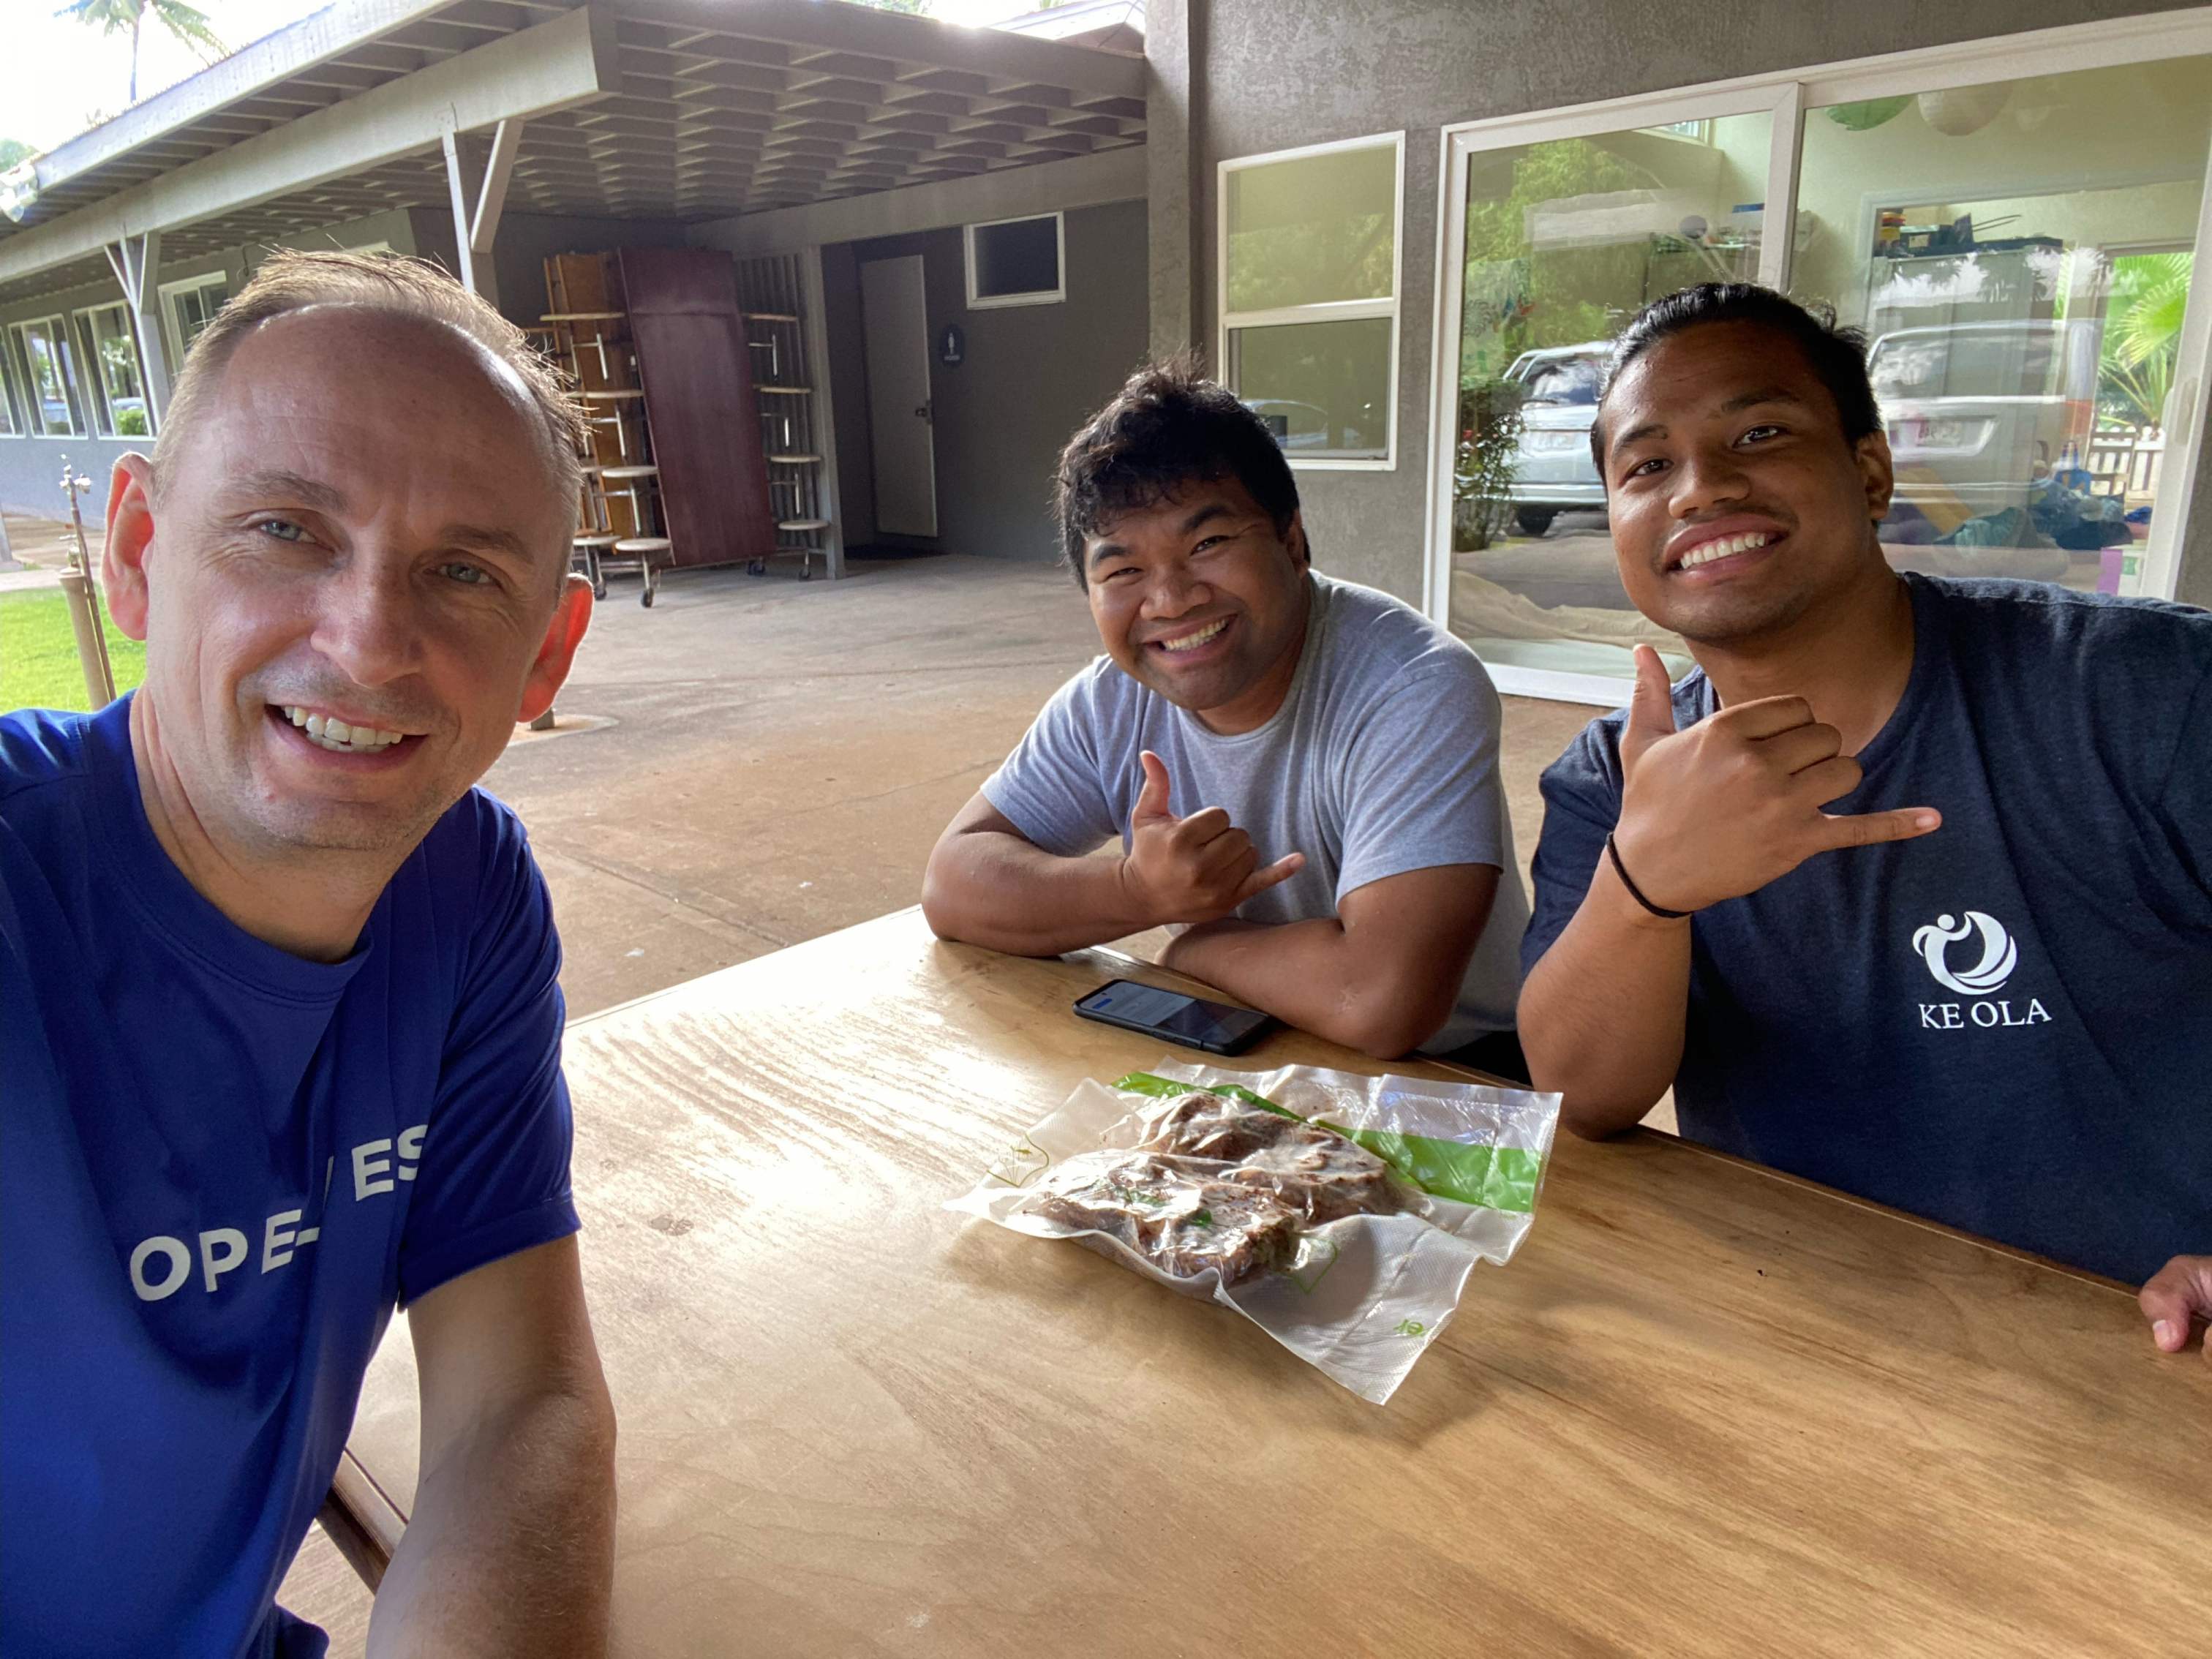 Photo of three men seated and smiling, one white and two of Hawaiian descent